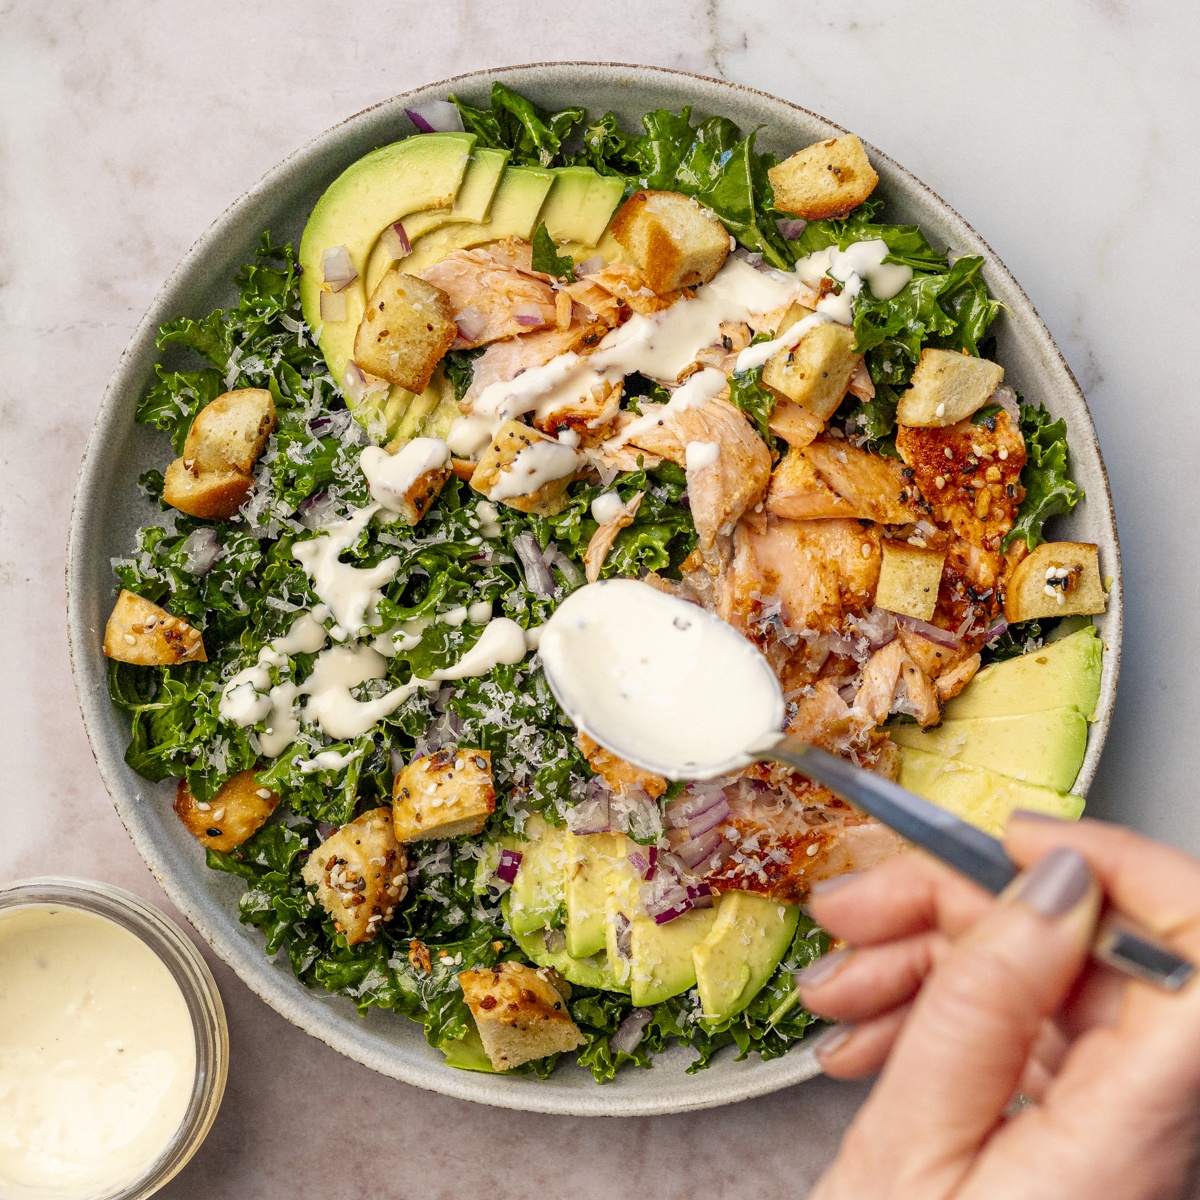 A woman's hand holding a spoon and drizzling dressing over a ceramic bowl full of salmon kale salad. A small bowl of dressing is sitting nearby.